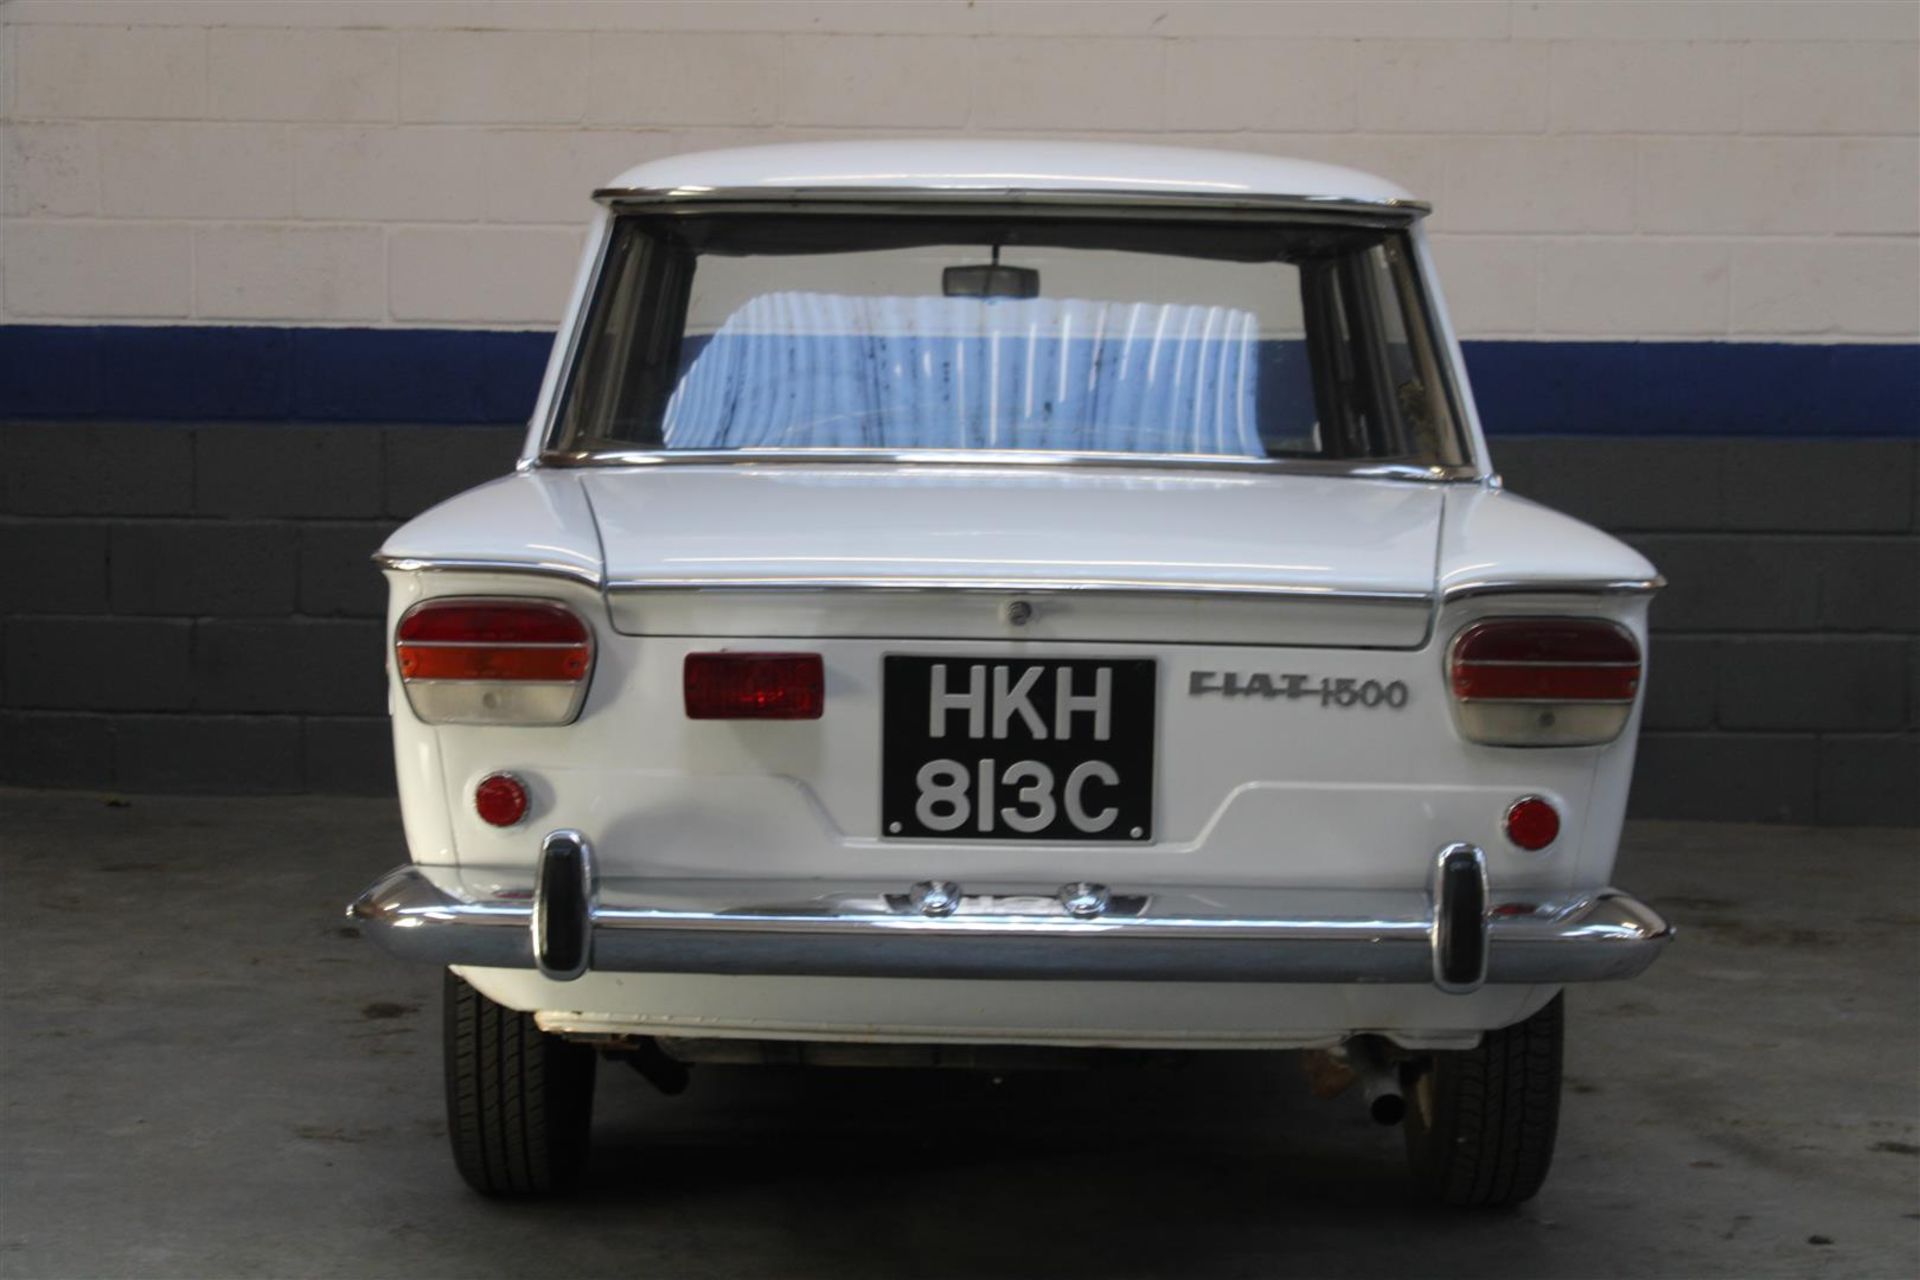 1965 Fiat 1500 C LHD - Image 10 of 22